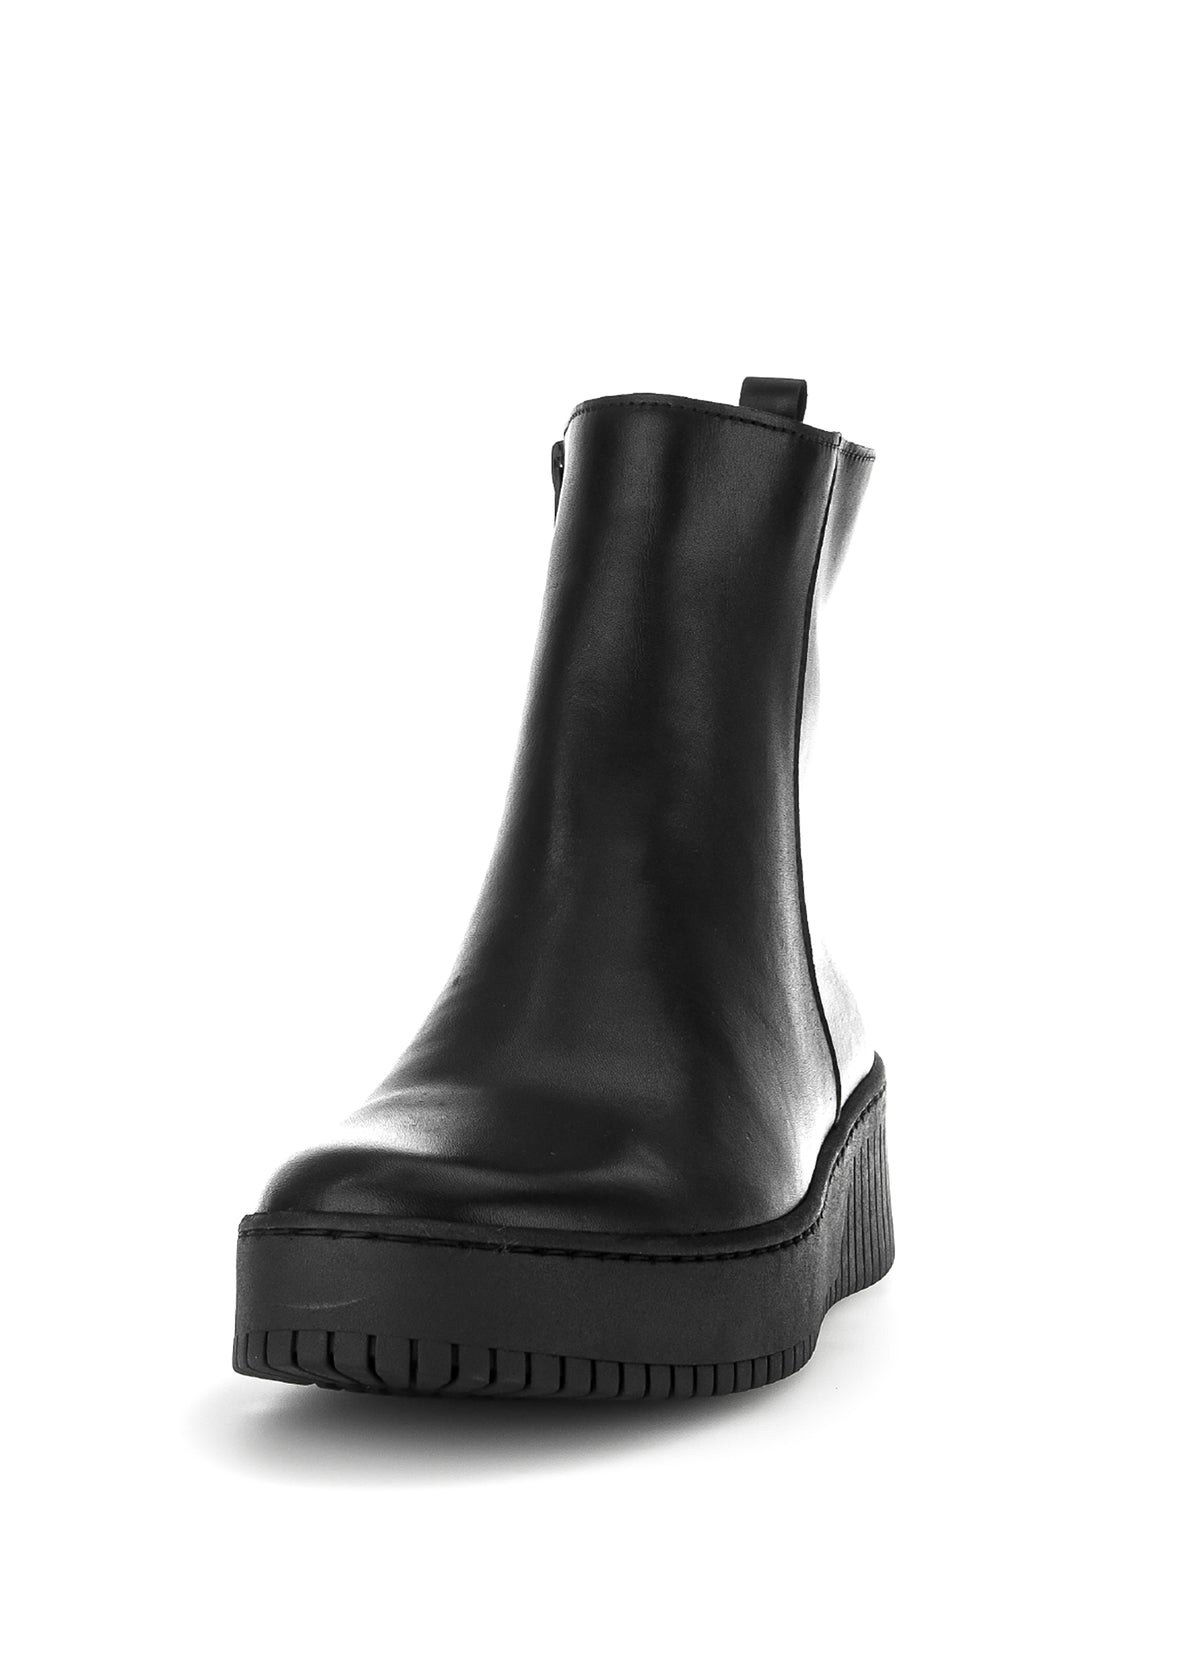 Winter shoes with wedge sole - black